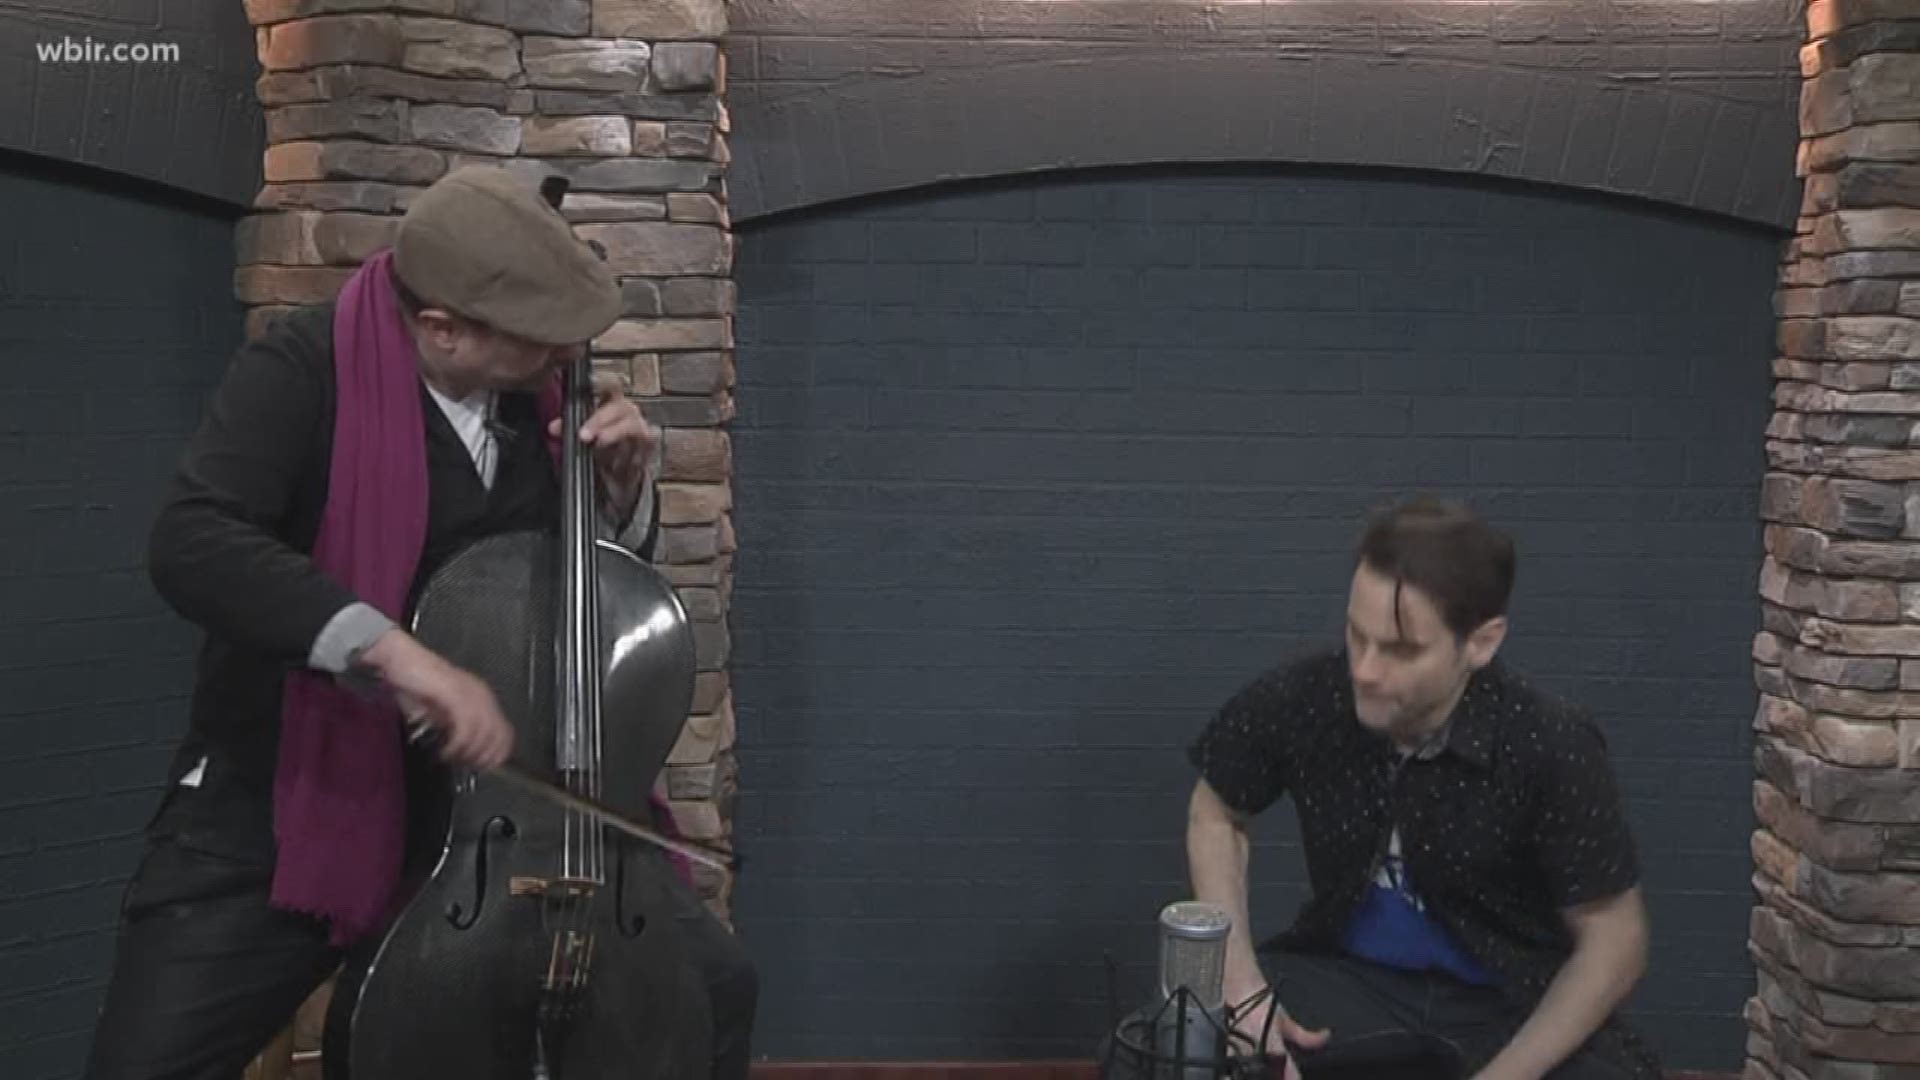 Chuck Palmer and Dave Eggar from Cellogram give us a live musical performance.